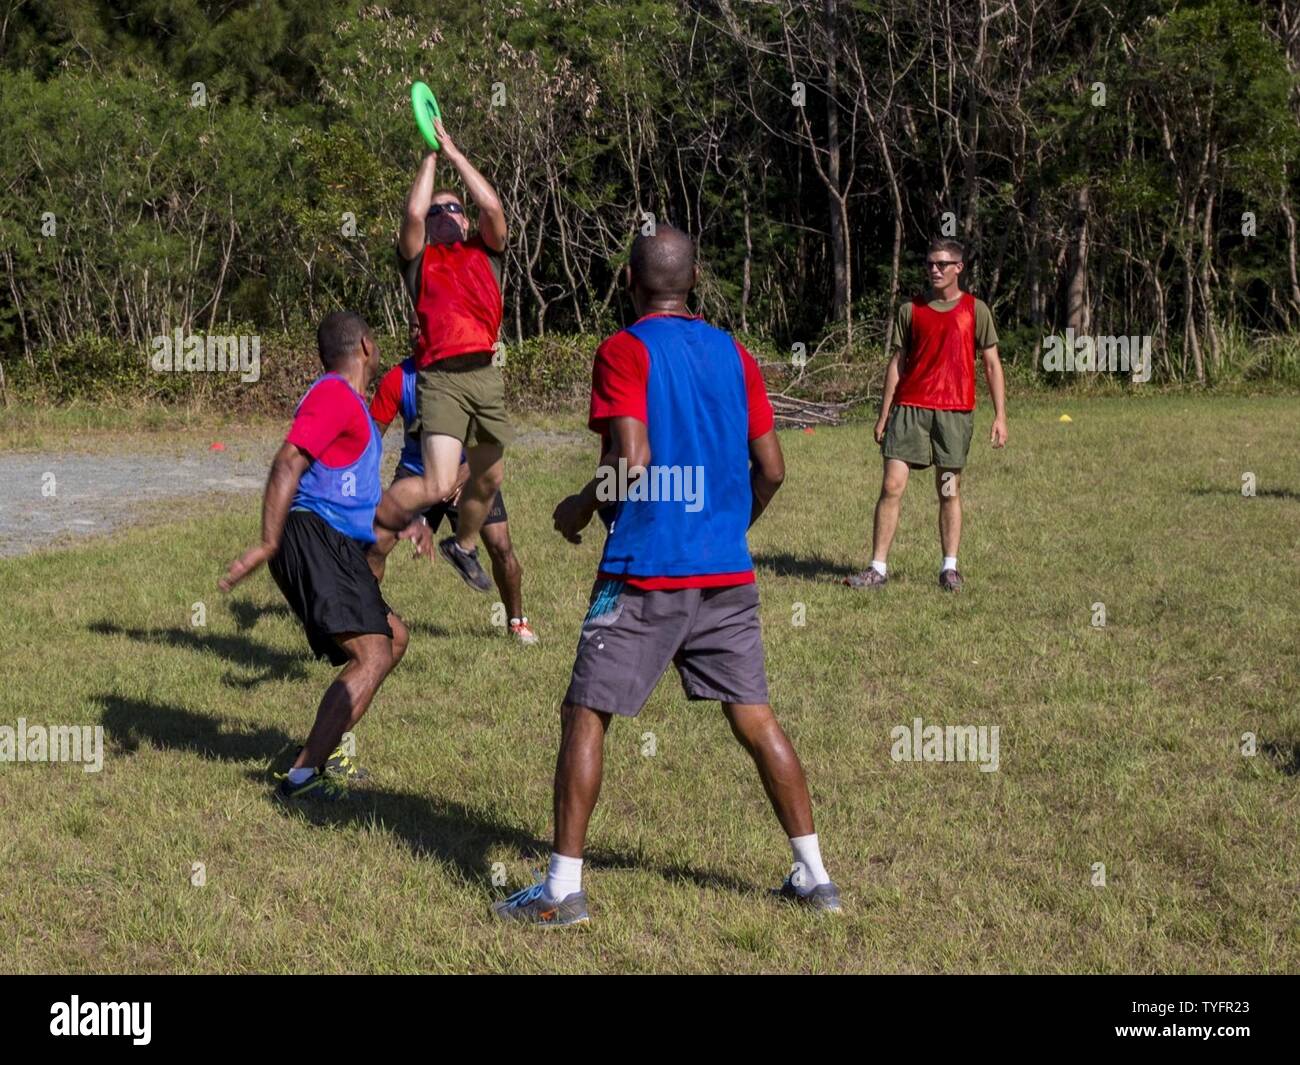 U.S. Marines with Combat Engineer Platoon, Task Force Koa Moana 16-4, play ultimate Frisbee with the Republic of Fiji Military Forces during Croix Du Sud in Plum, New Caledonia, Nov. 6, 2016. Croix Du Sud is a multi-national, humanitarian assistance disaster relief and non-combatant evacuation operation exercise conducted every two years to prepare nations in the event of a cyclone in the South Pacific. The Koa Moana exercise seeks to enhance senior military leader engagements between allied and partner nations in the Pacific with a collective interest in military-to-military relations. Stock Photo